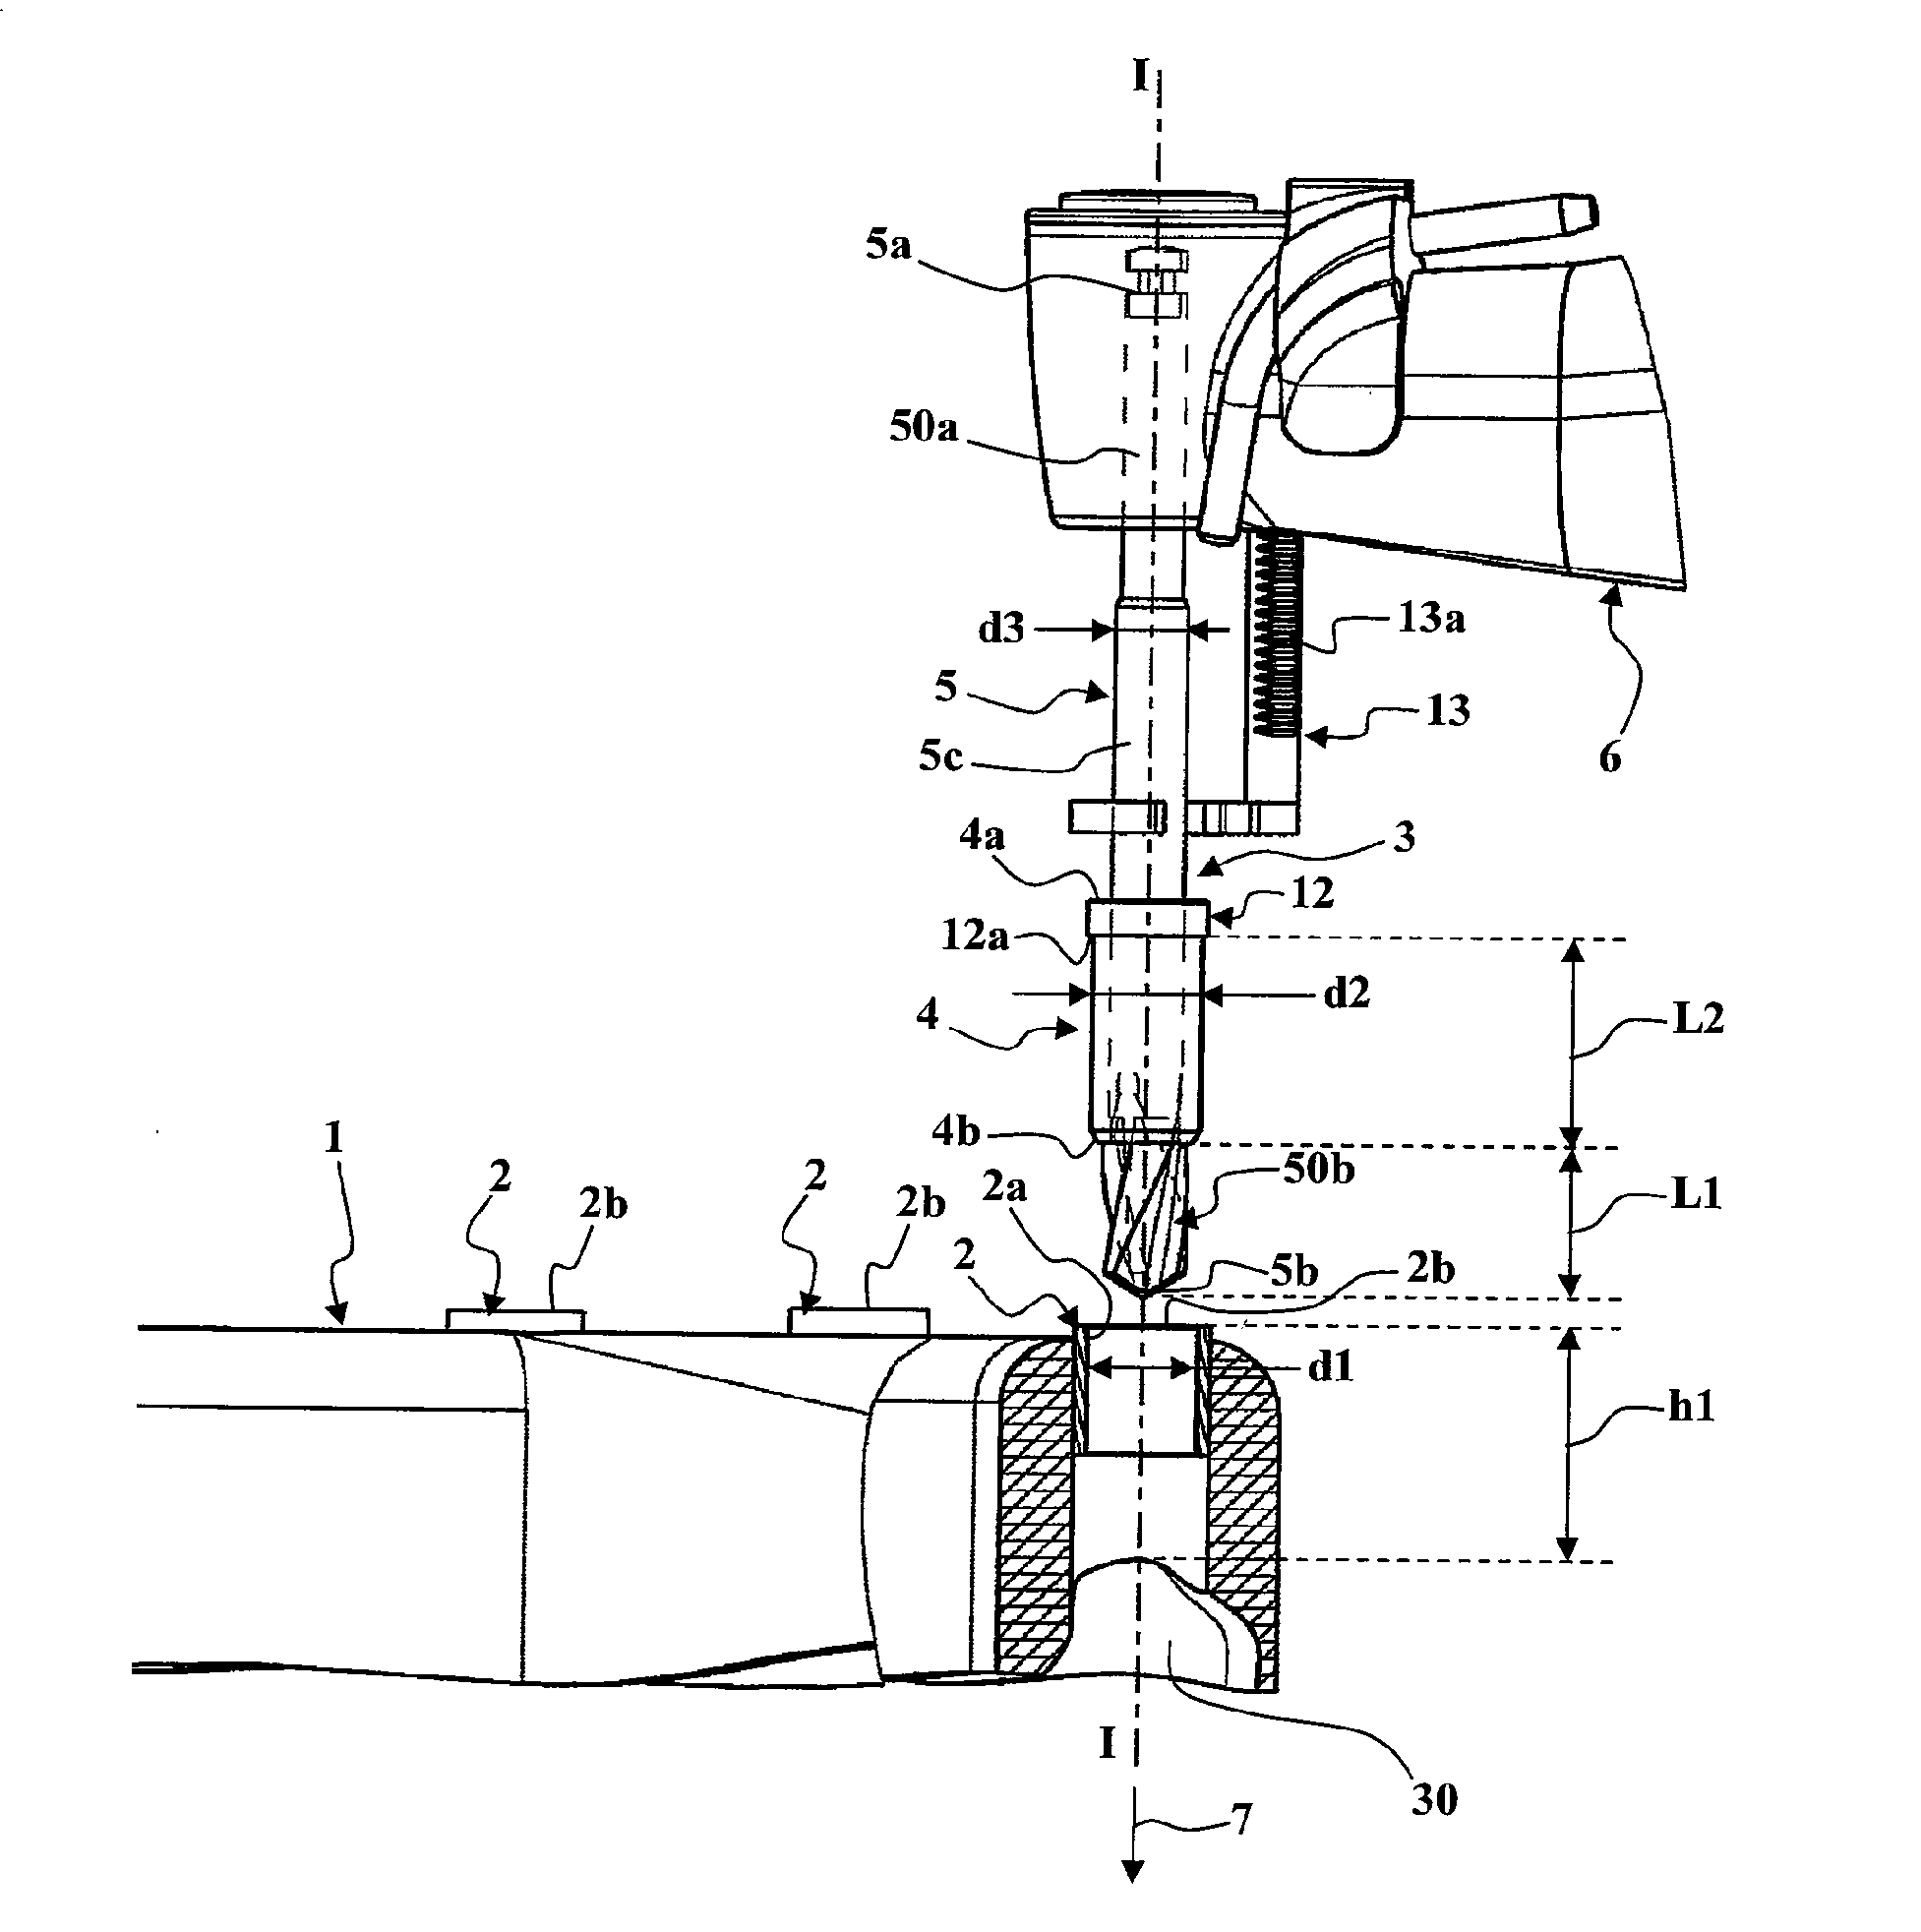 Device for centering and guiding a drill bit of a dental handpiece